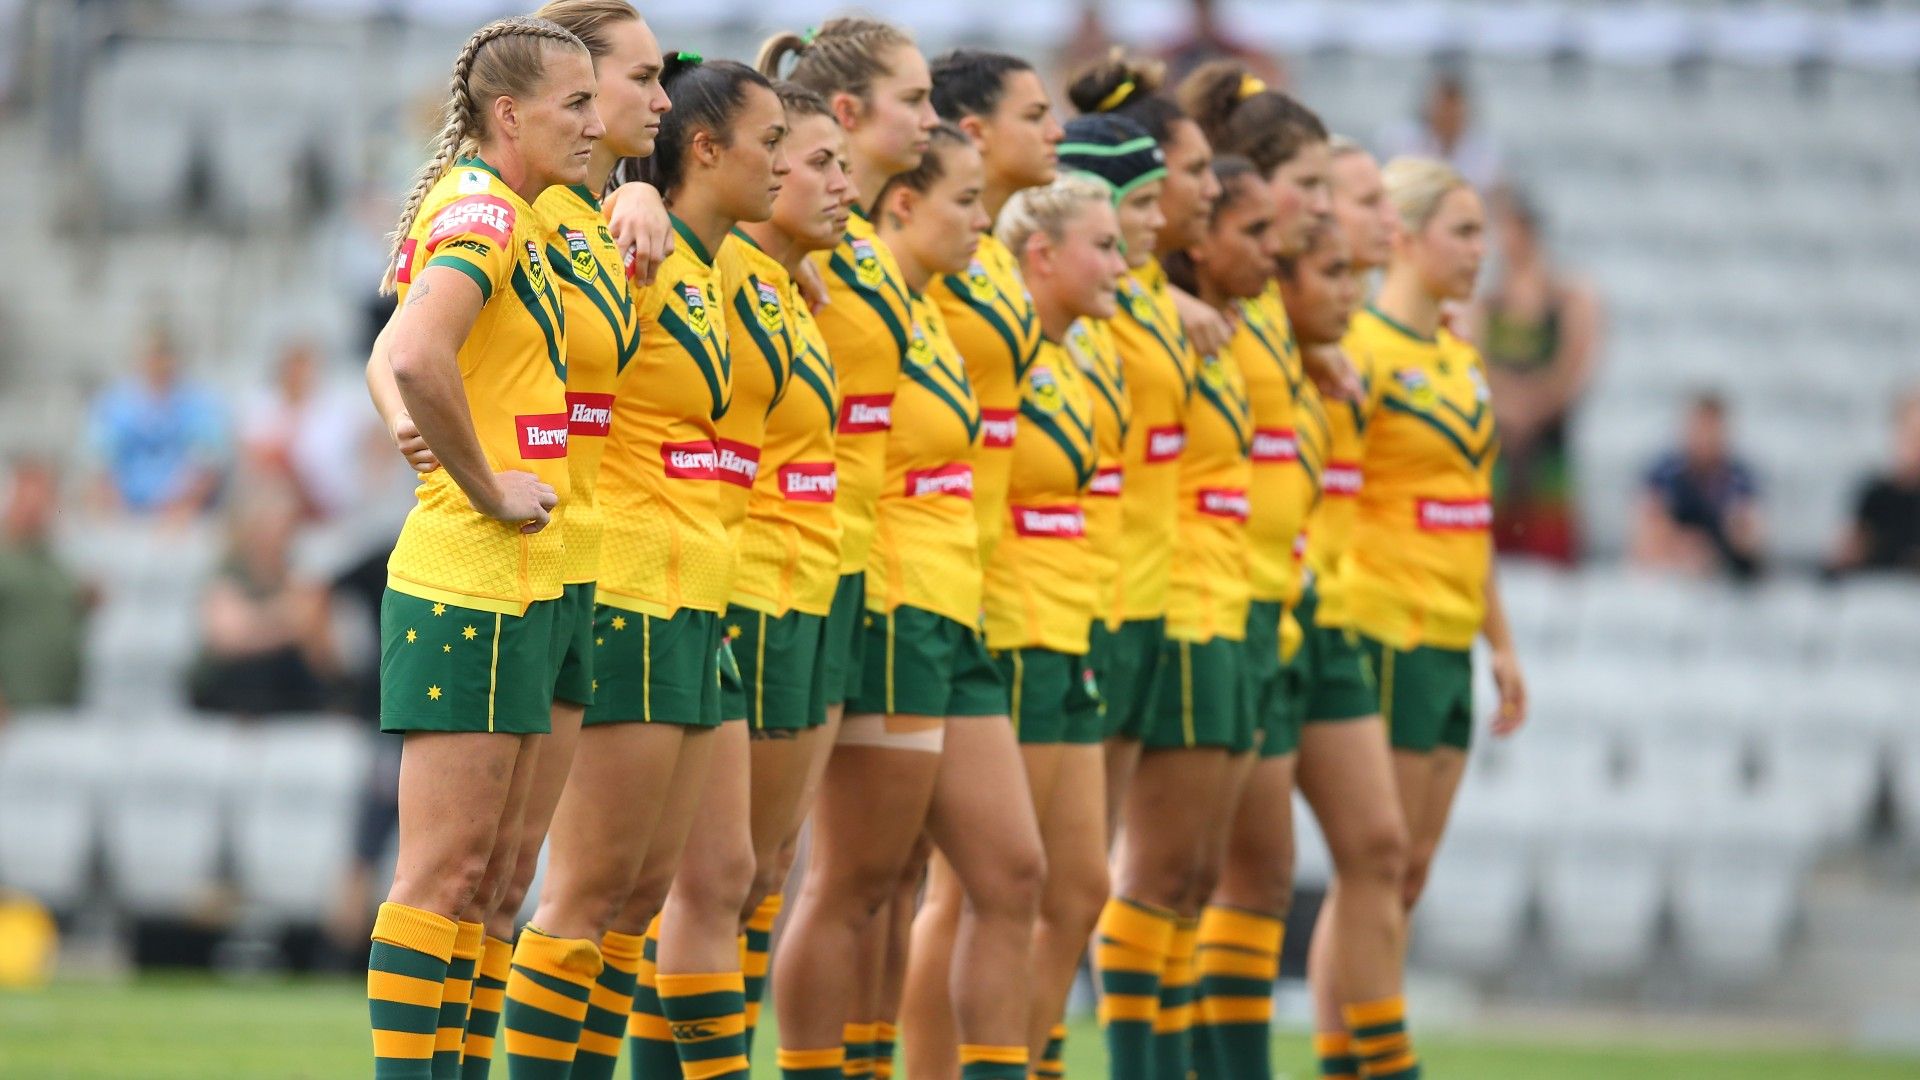 Rugby league bans transgender athletes from World Cup, World Athletics, FIFA to review eligibility